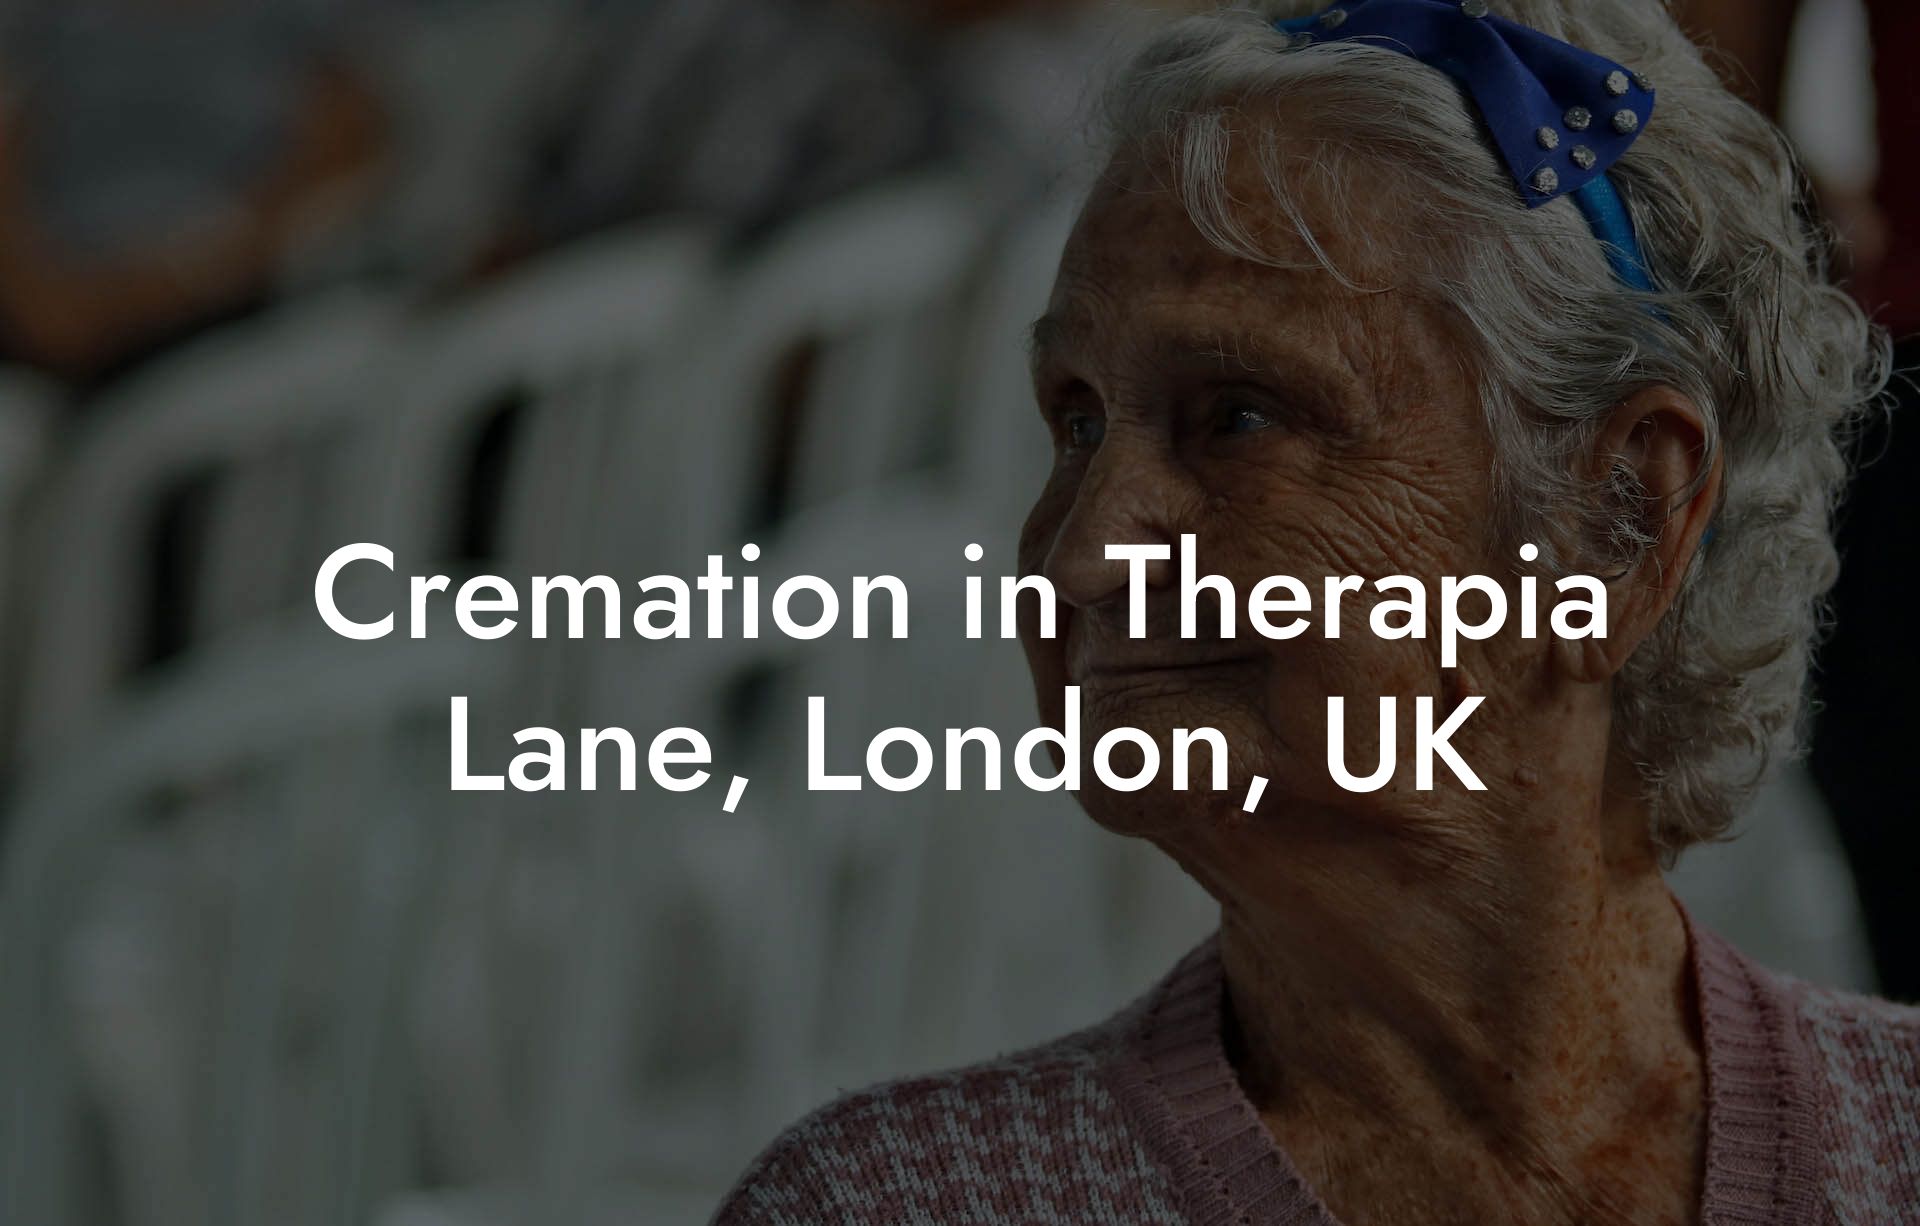 Cremation in Therapia Lane, London, UK